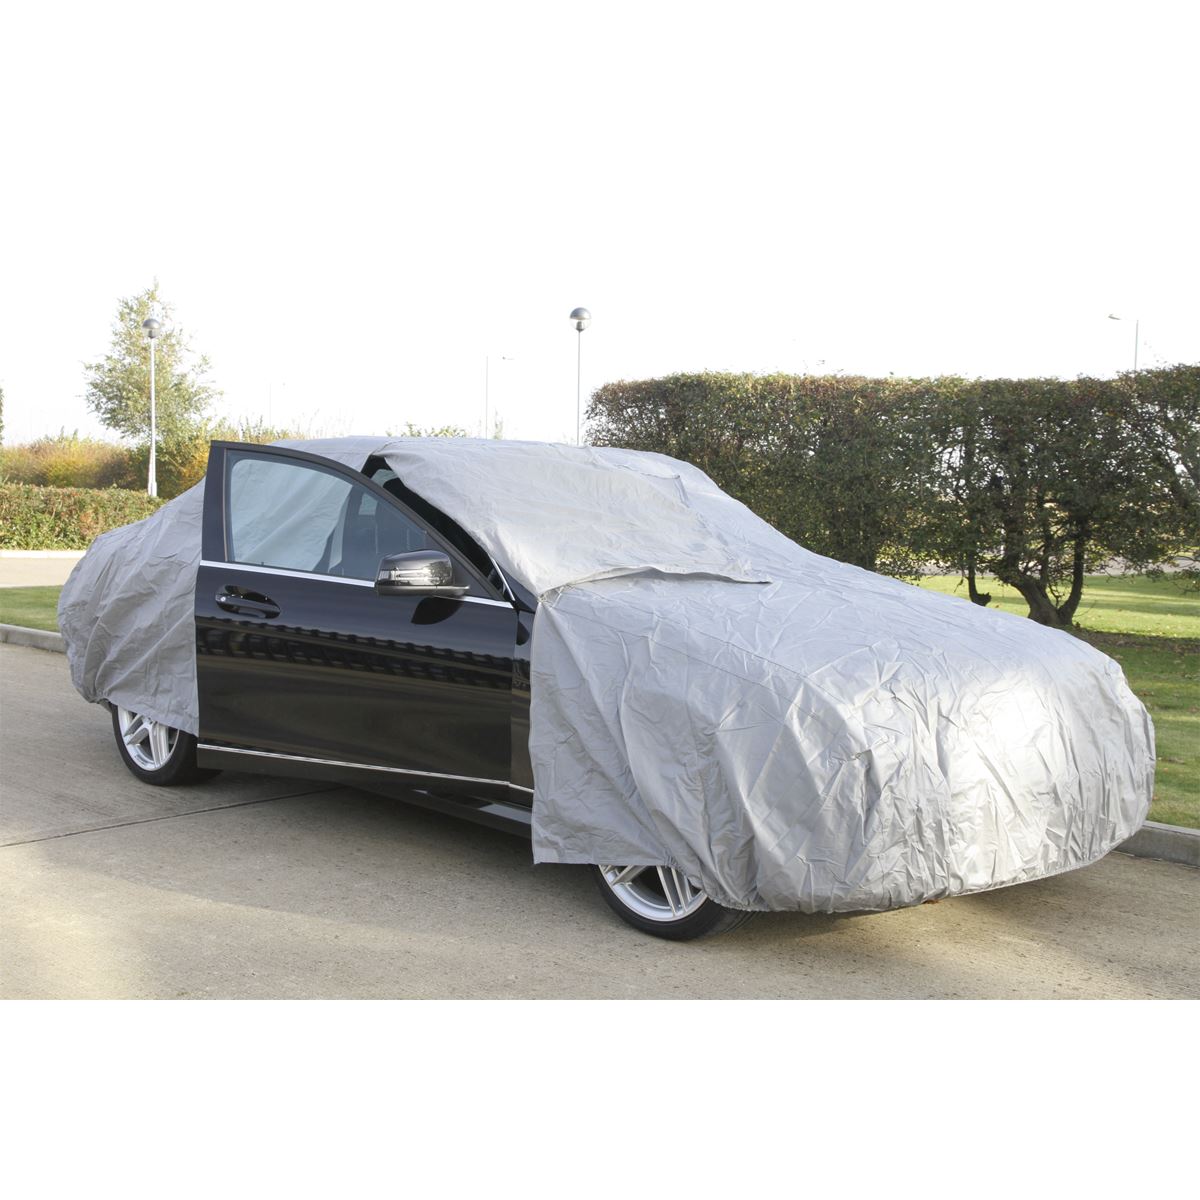 Sealey Car Cover X-Large 4830 x 1780 x 1220mm